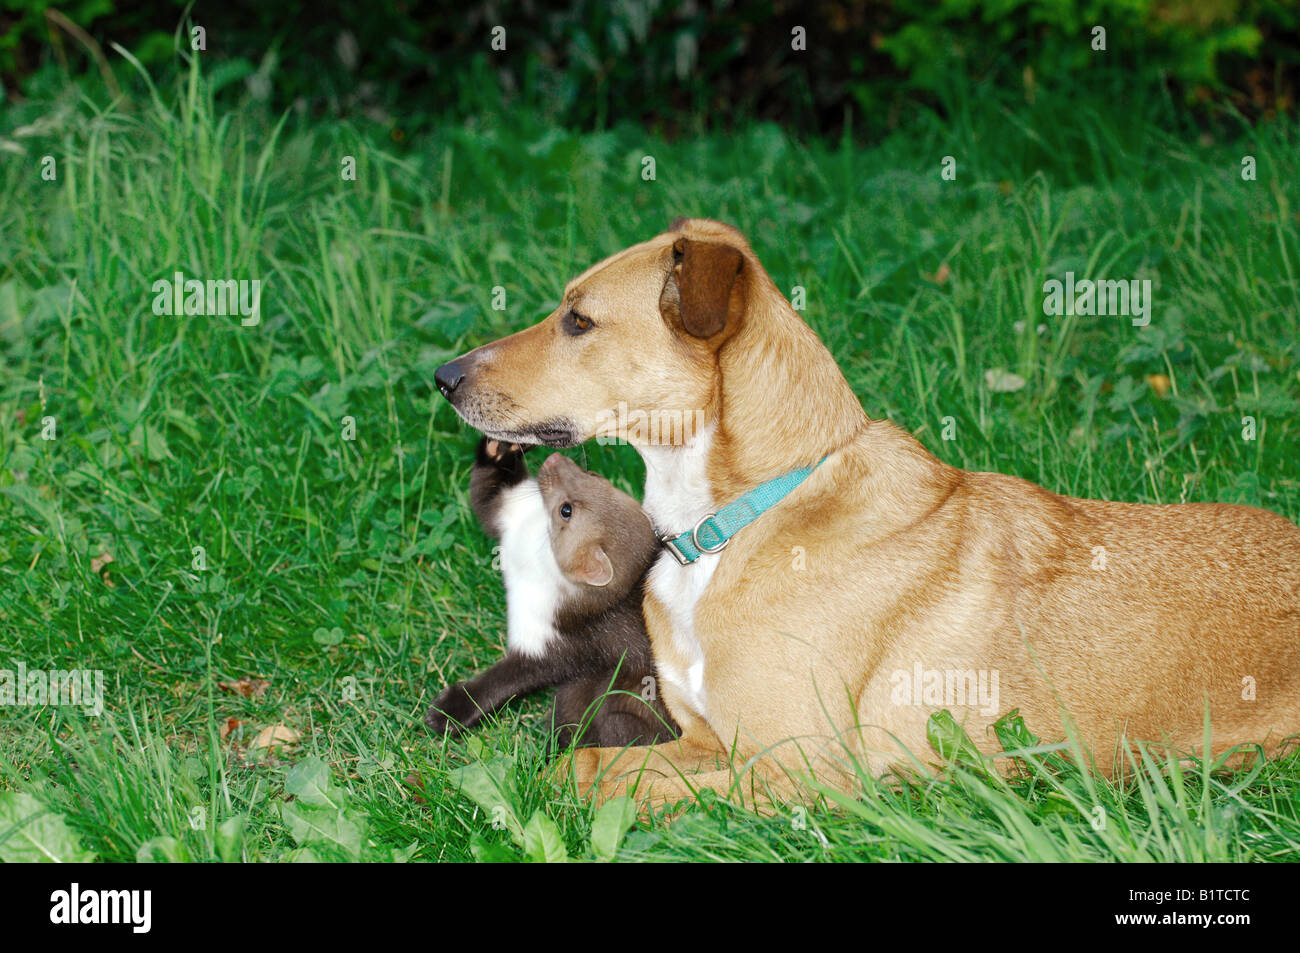 animal friendship: half breed dog and young beech marten on meadow Stock Photo